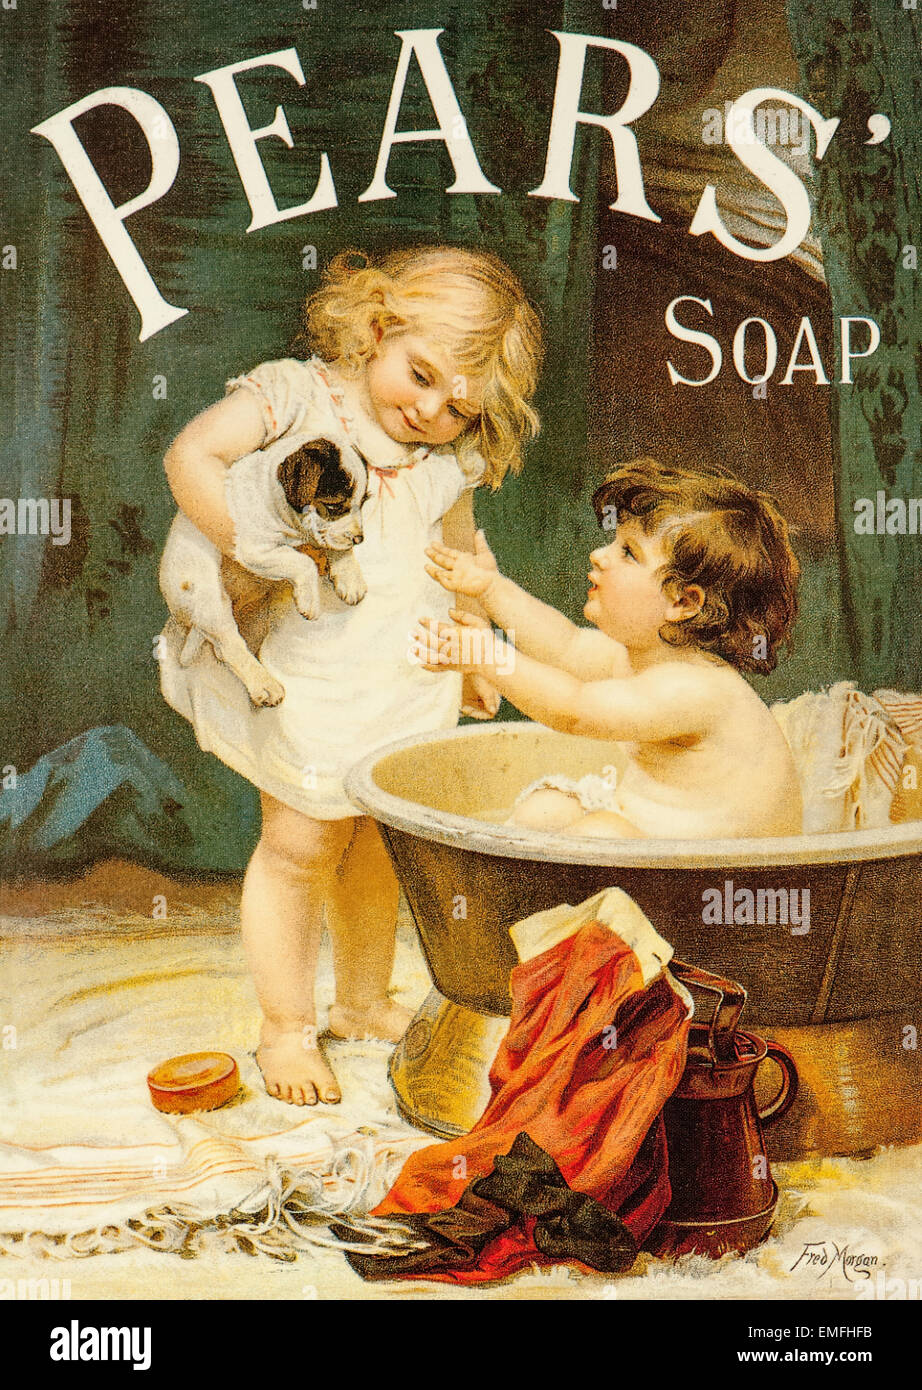 A Victorian advertisement for Pear's Soap Stock Photo